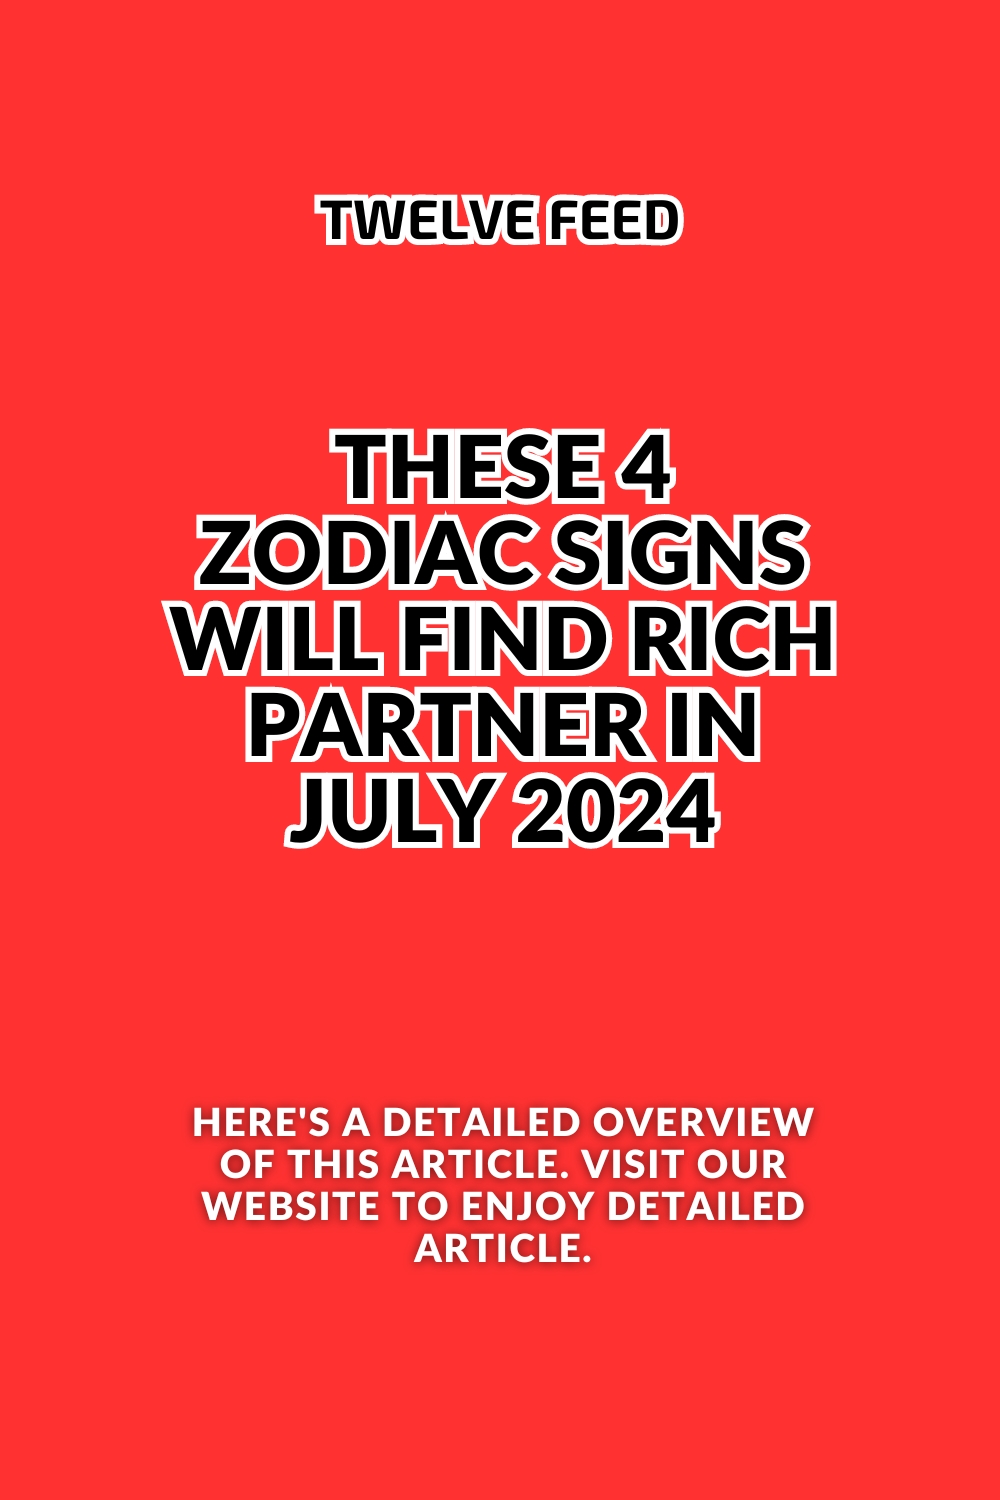 These 4 Zodiac Signs Will Find Rich Partner In July 2024